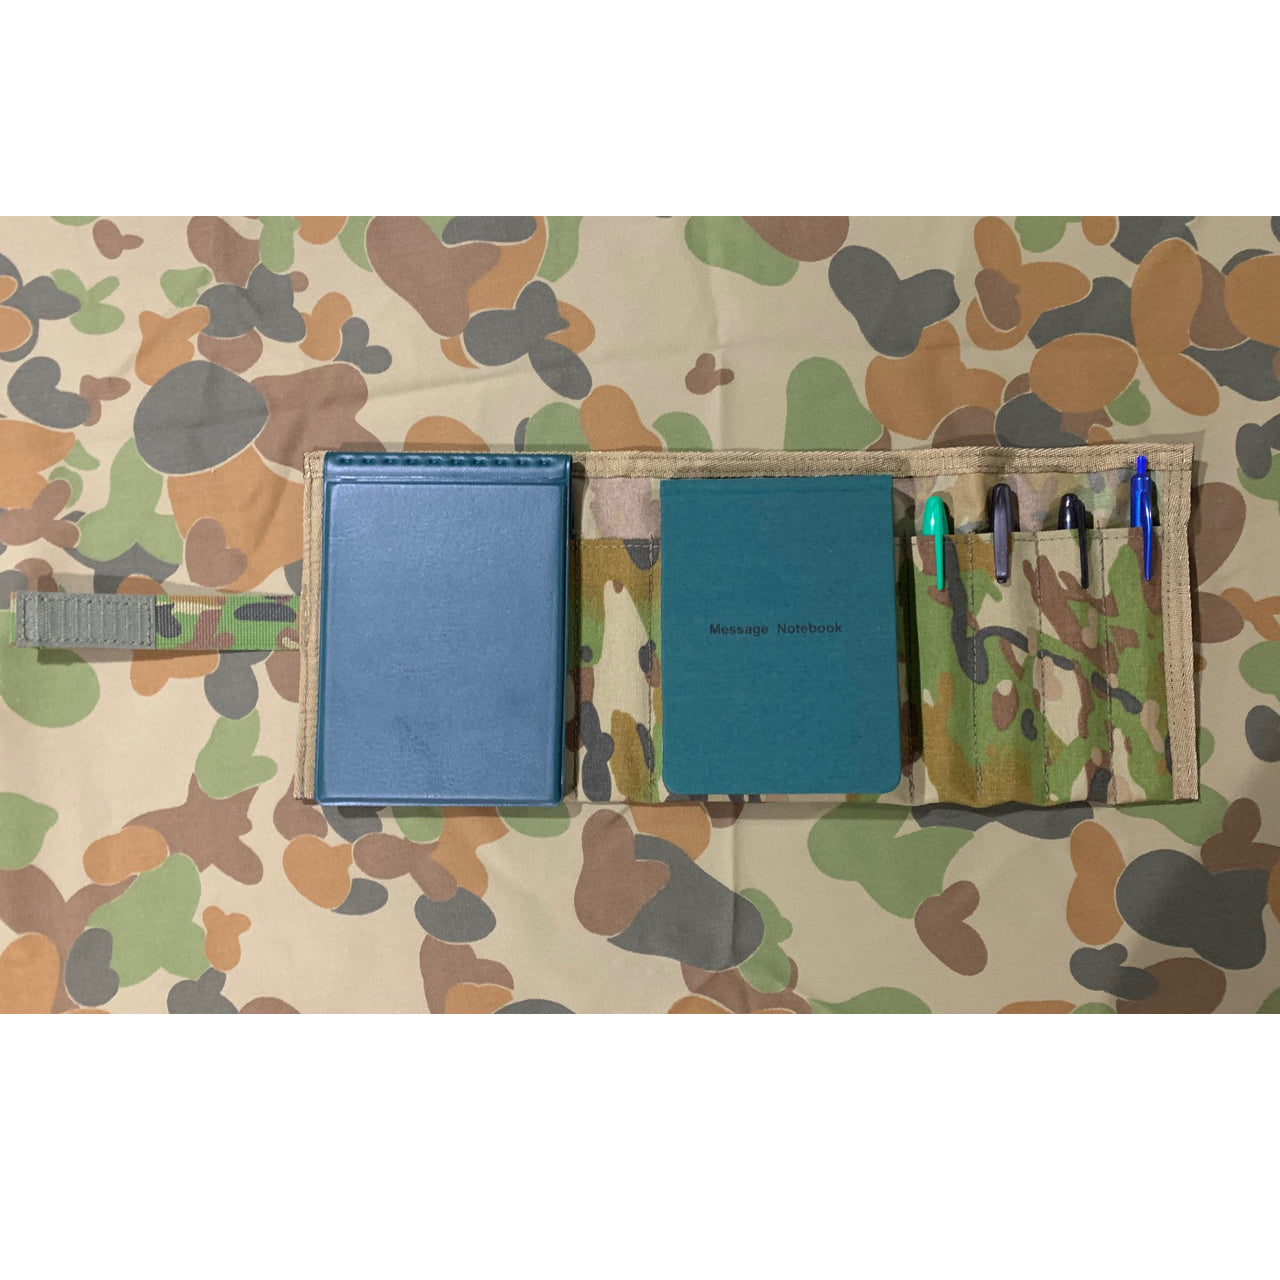 With the edition of our new AMC Notebook Cover, we had to make a bundle for you legends out there and to save buying everything individually which can be costly. Bundle includes: Notebook Cover, 20 page Viewee Twoee, Field Notebook and x4 black pens or we can exchange x2 pens for x2 pencils if you like www.defenceqstore.com.au